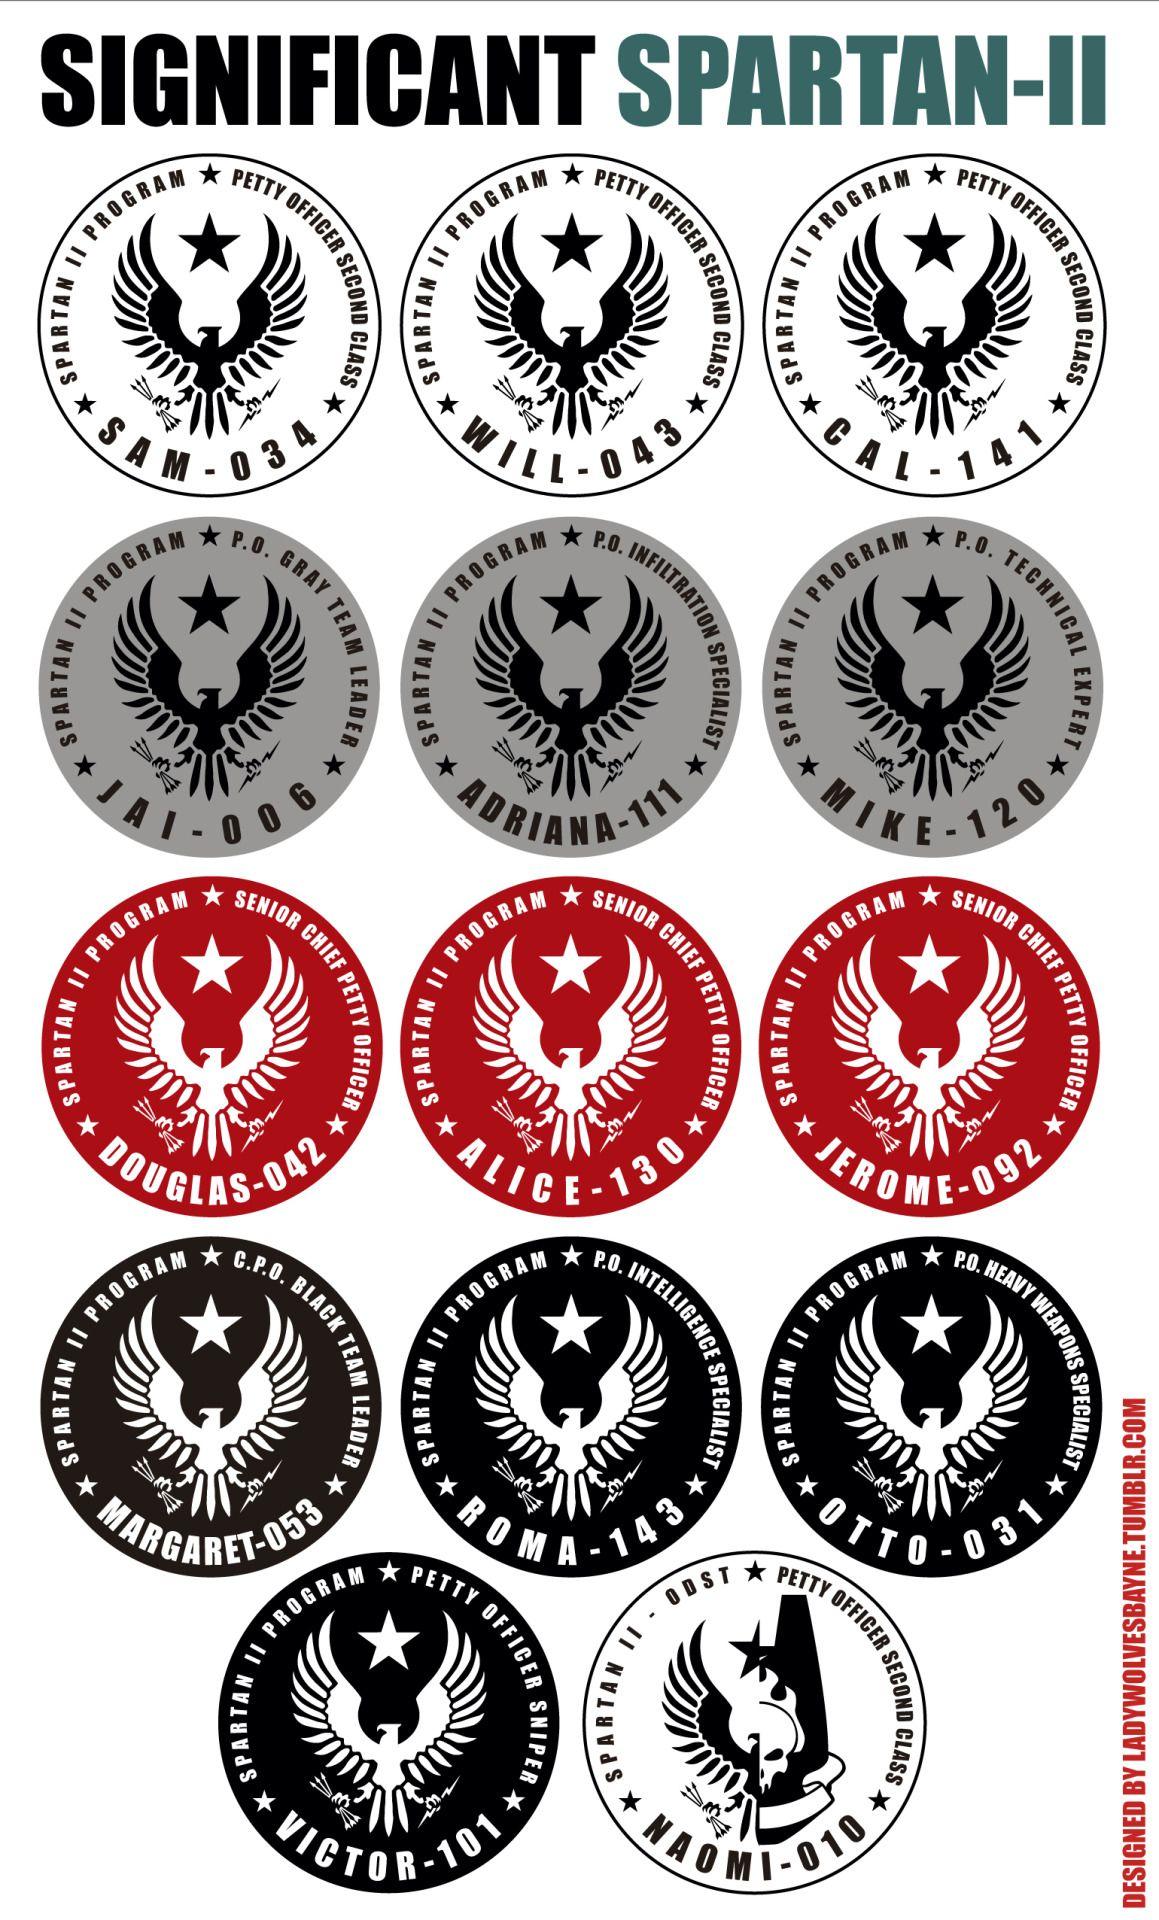 SPARTAN-II Logo - PERSONA NON GRATA — And the last set of HALO BADGES, all significant...